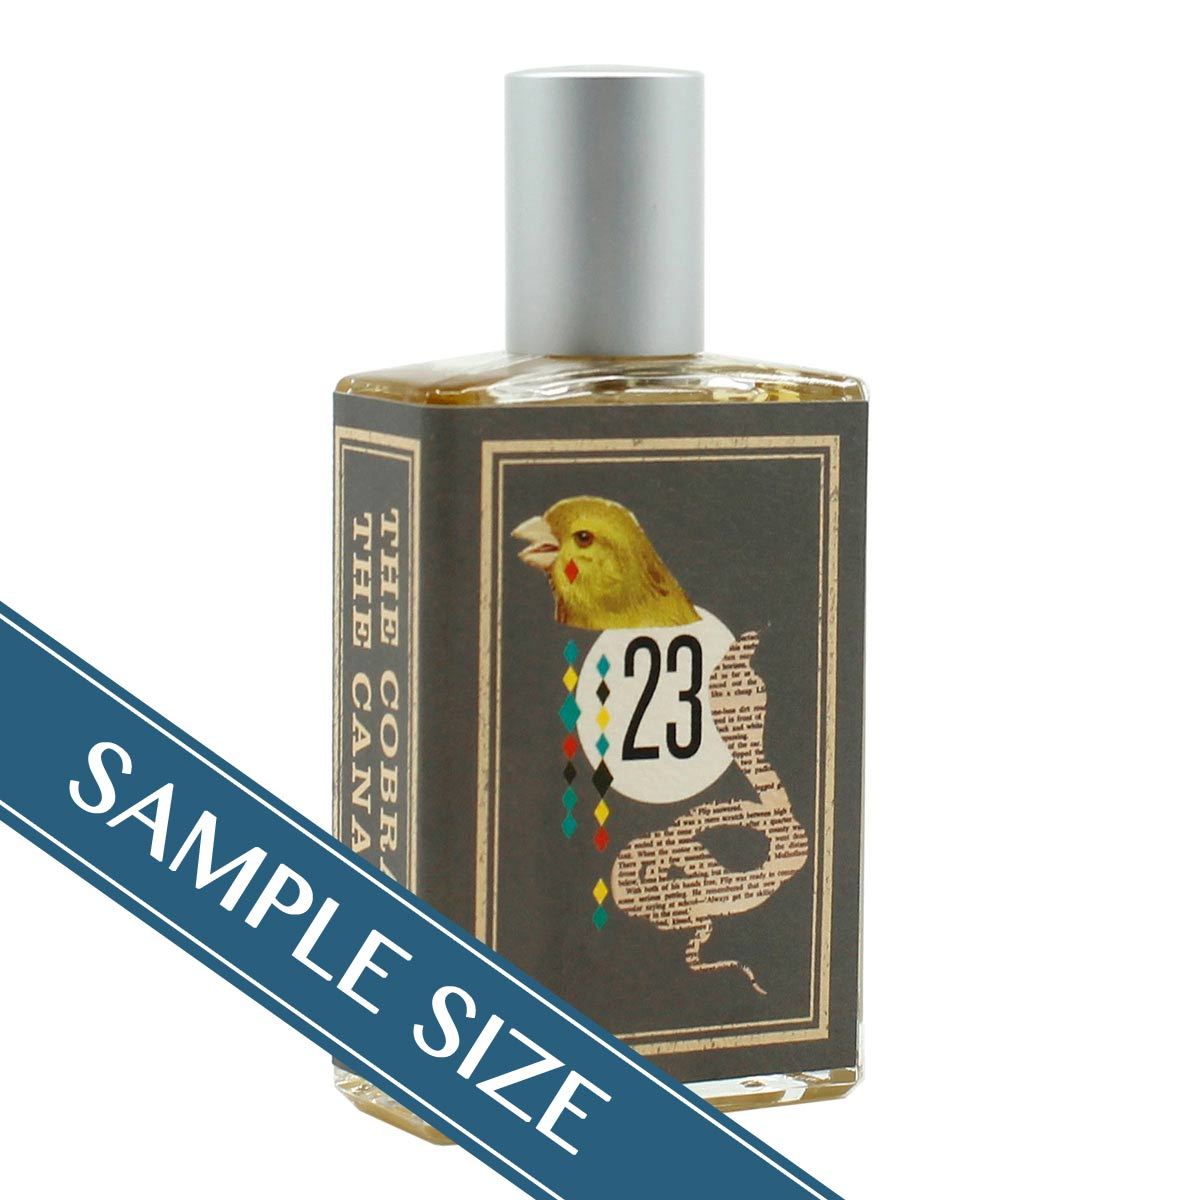 Primary image of Sample - The Cobra + The Canary EDP